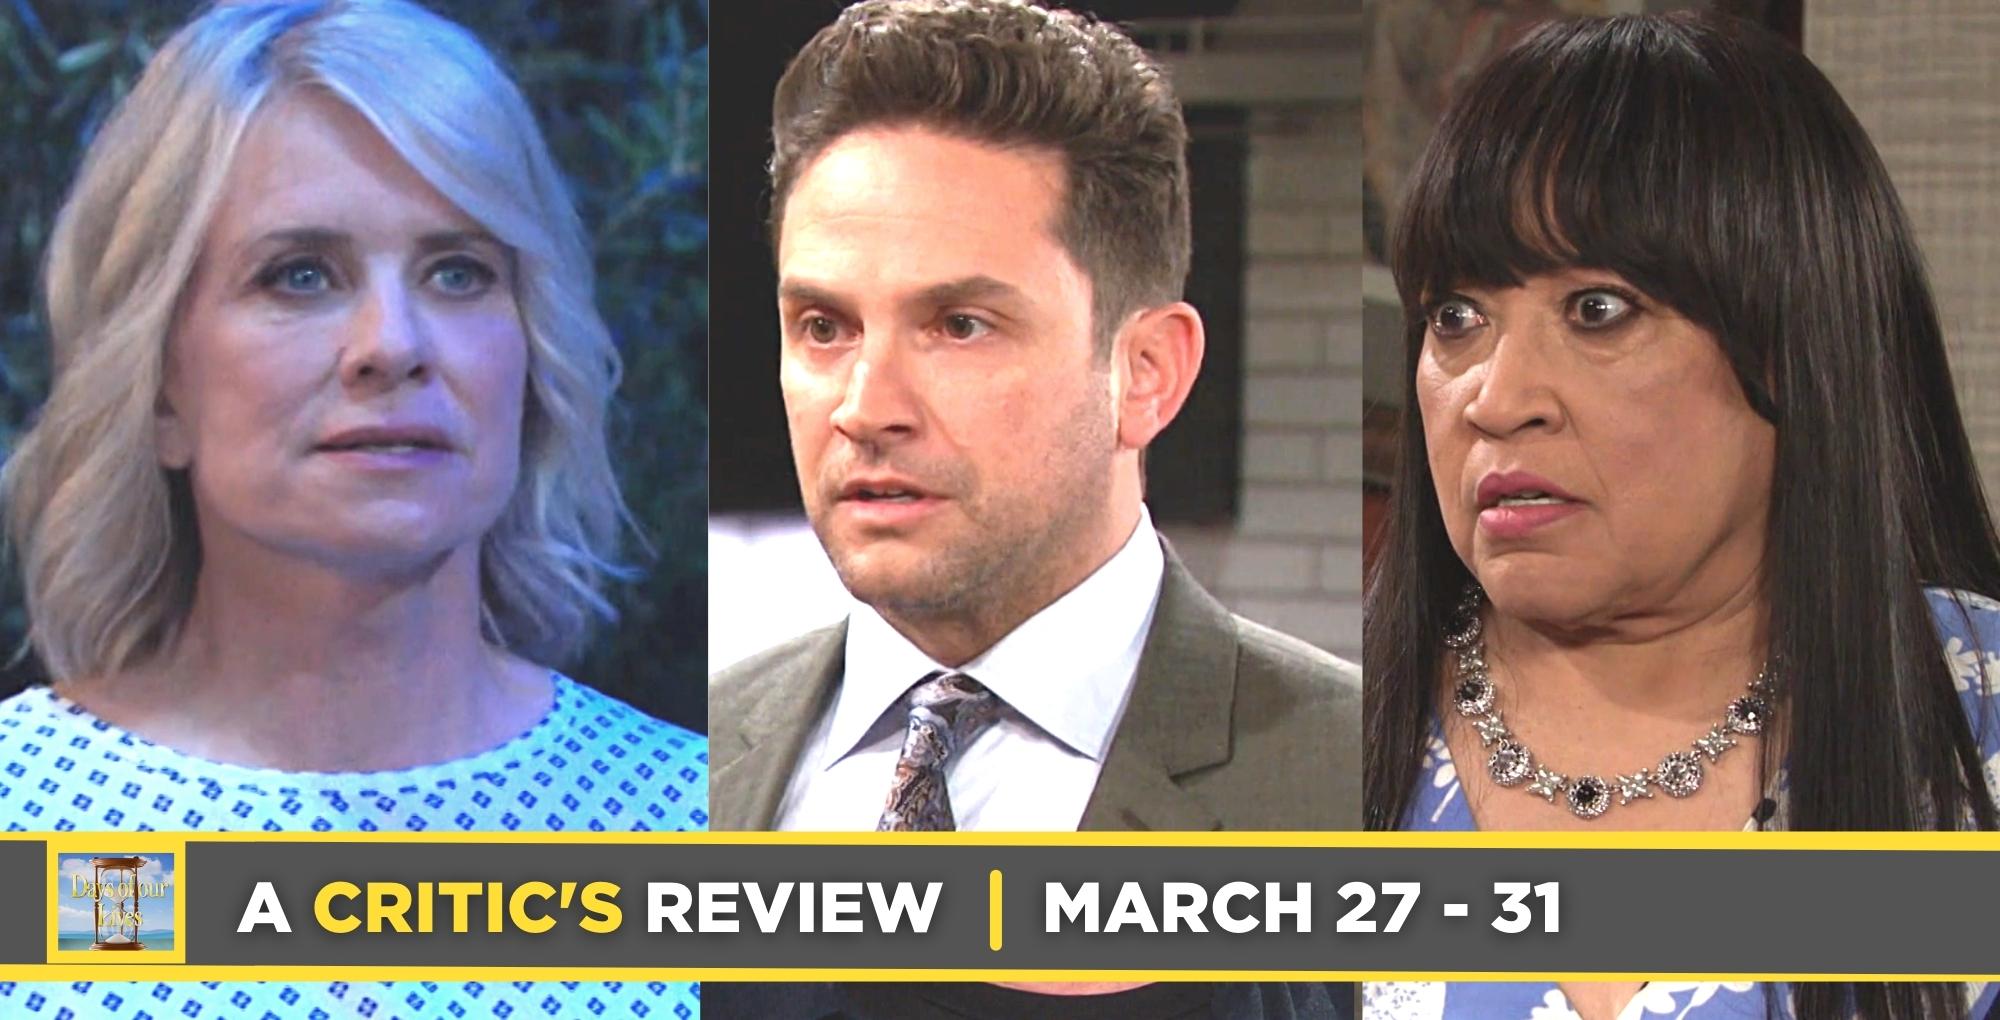 days of our lives critic's review for march 27 – march 31, 2023, three images kayla, stefan, and paulina